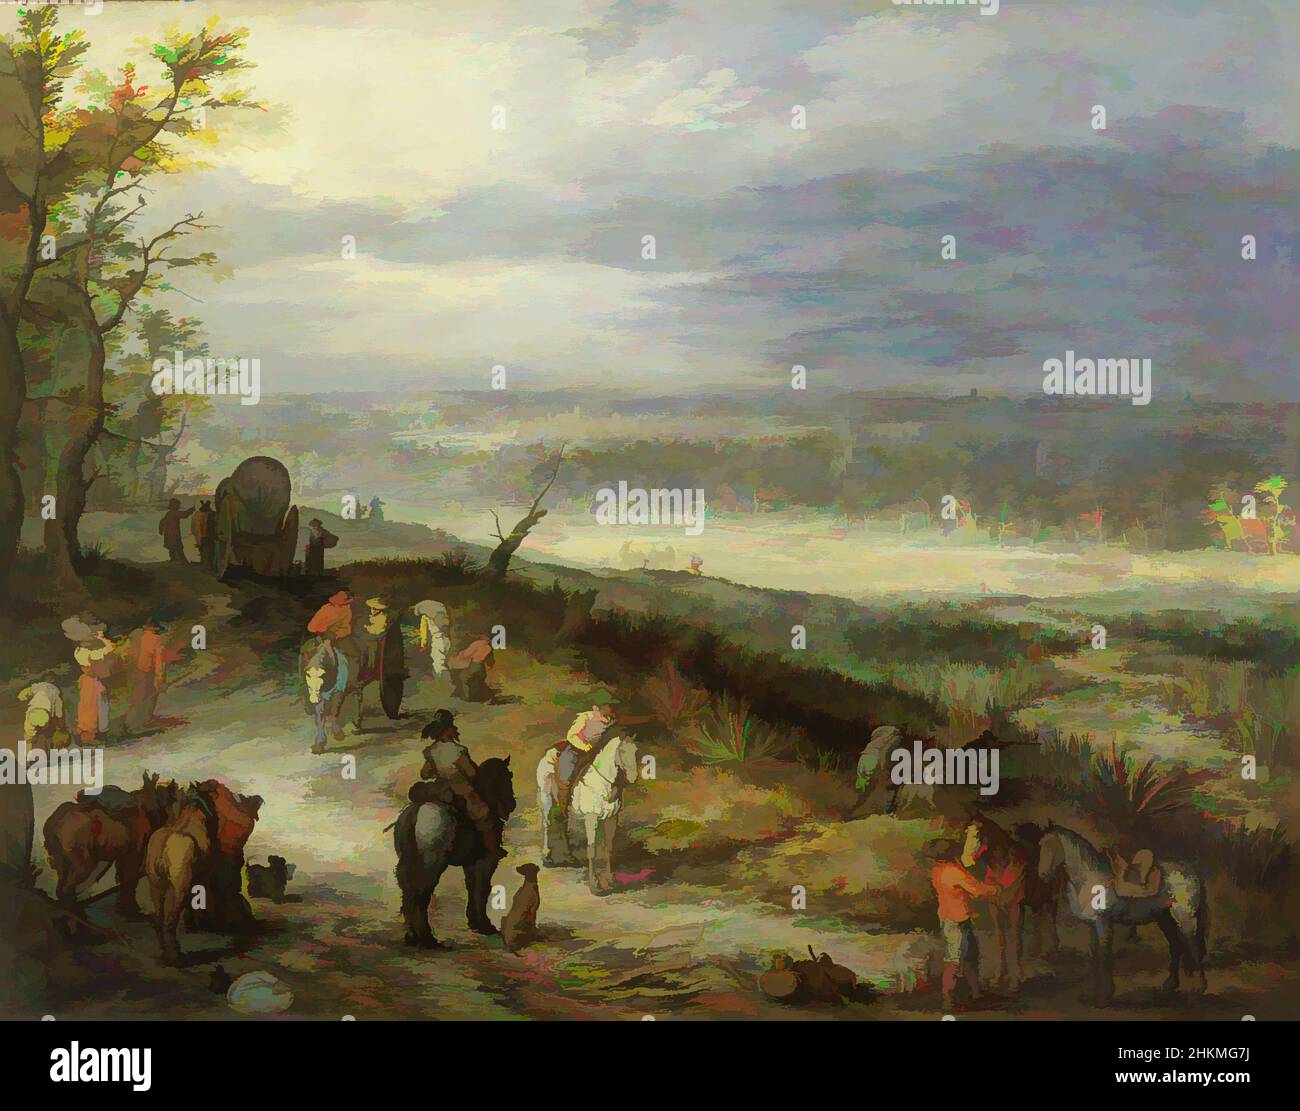 Art inspired by Extensive Landscape With Travellers on a Country Road, Jan Brueghel the Elder, Flemish, 1568-1625, c.1608-10, Oil on copper, Made in Antwerp, Antwerpen province, Belgium, Europe, Paintings, 13 1/4 x 18 1/4 in. (33.6 x 46.4 cm, Classic works modernized by Artotop with a splash of modernity. Shapes, color and value, eye-catching visual impact on art. Emotions through freedom of artworks in a contemporary way. A timeless message pursuing a wildly creative new direction. Artists turning to the digital medium and creating the Artotop NFT Stock Photo